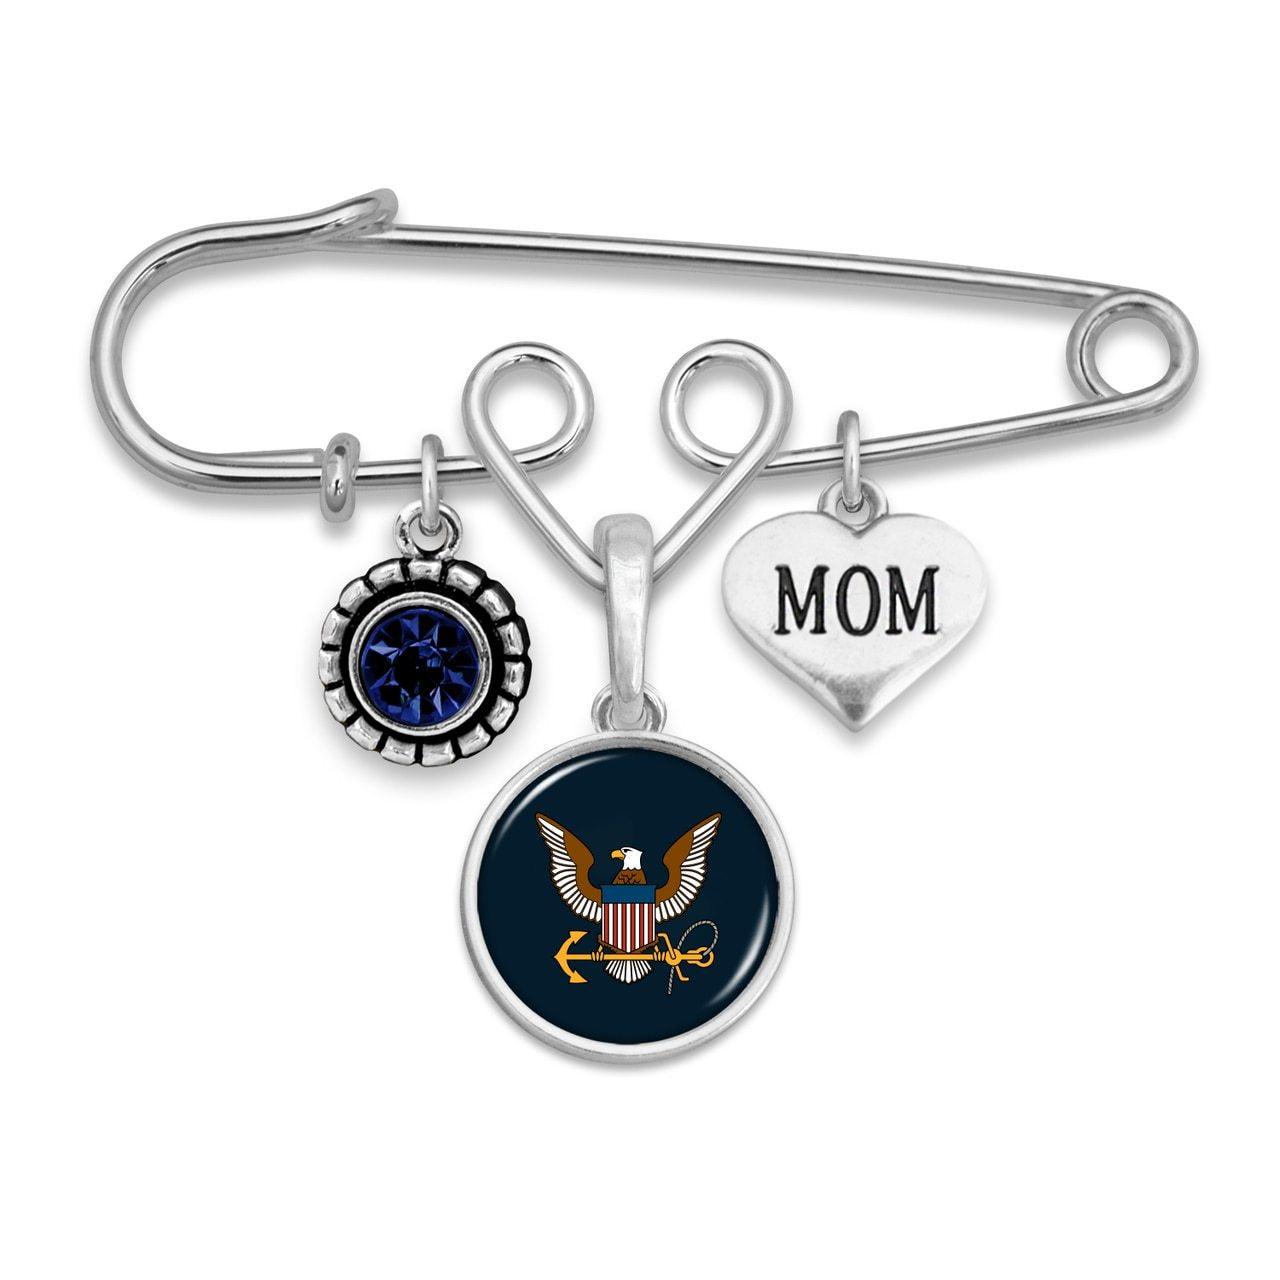 U.S. Navy Triple Charm Brooch with Mom Accent Charm - Military Republic